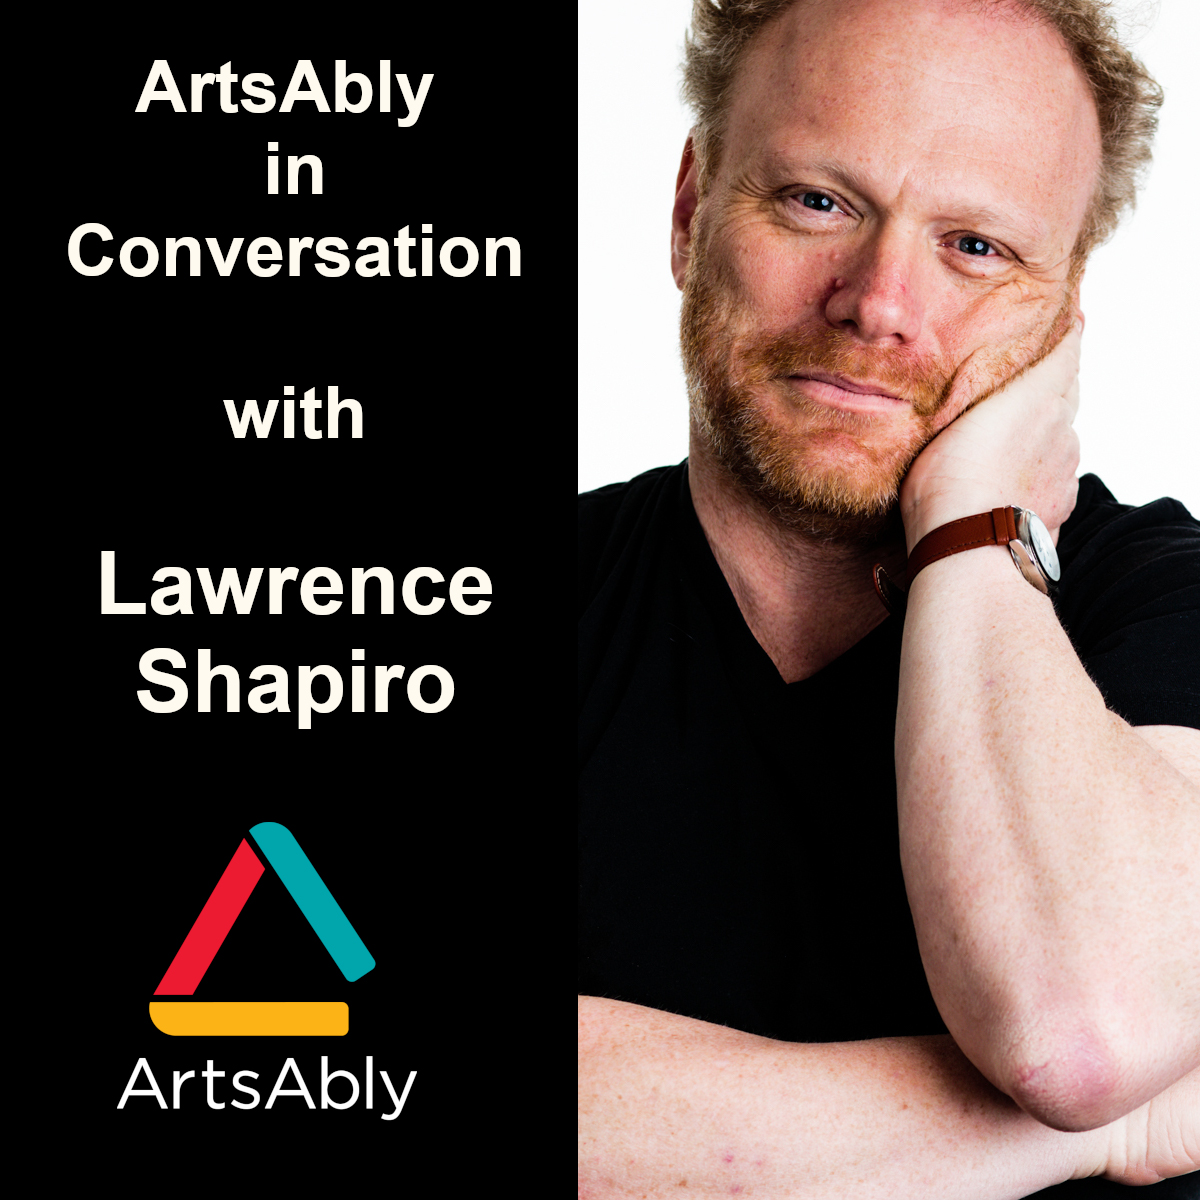 Episode 11: ArtsAbly in Conversation with Lawrence Shapiro